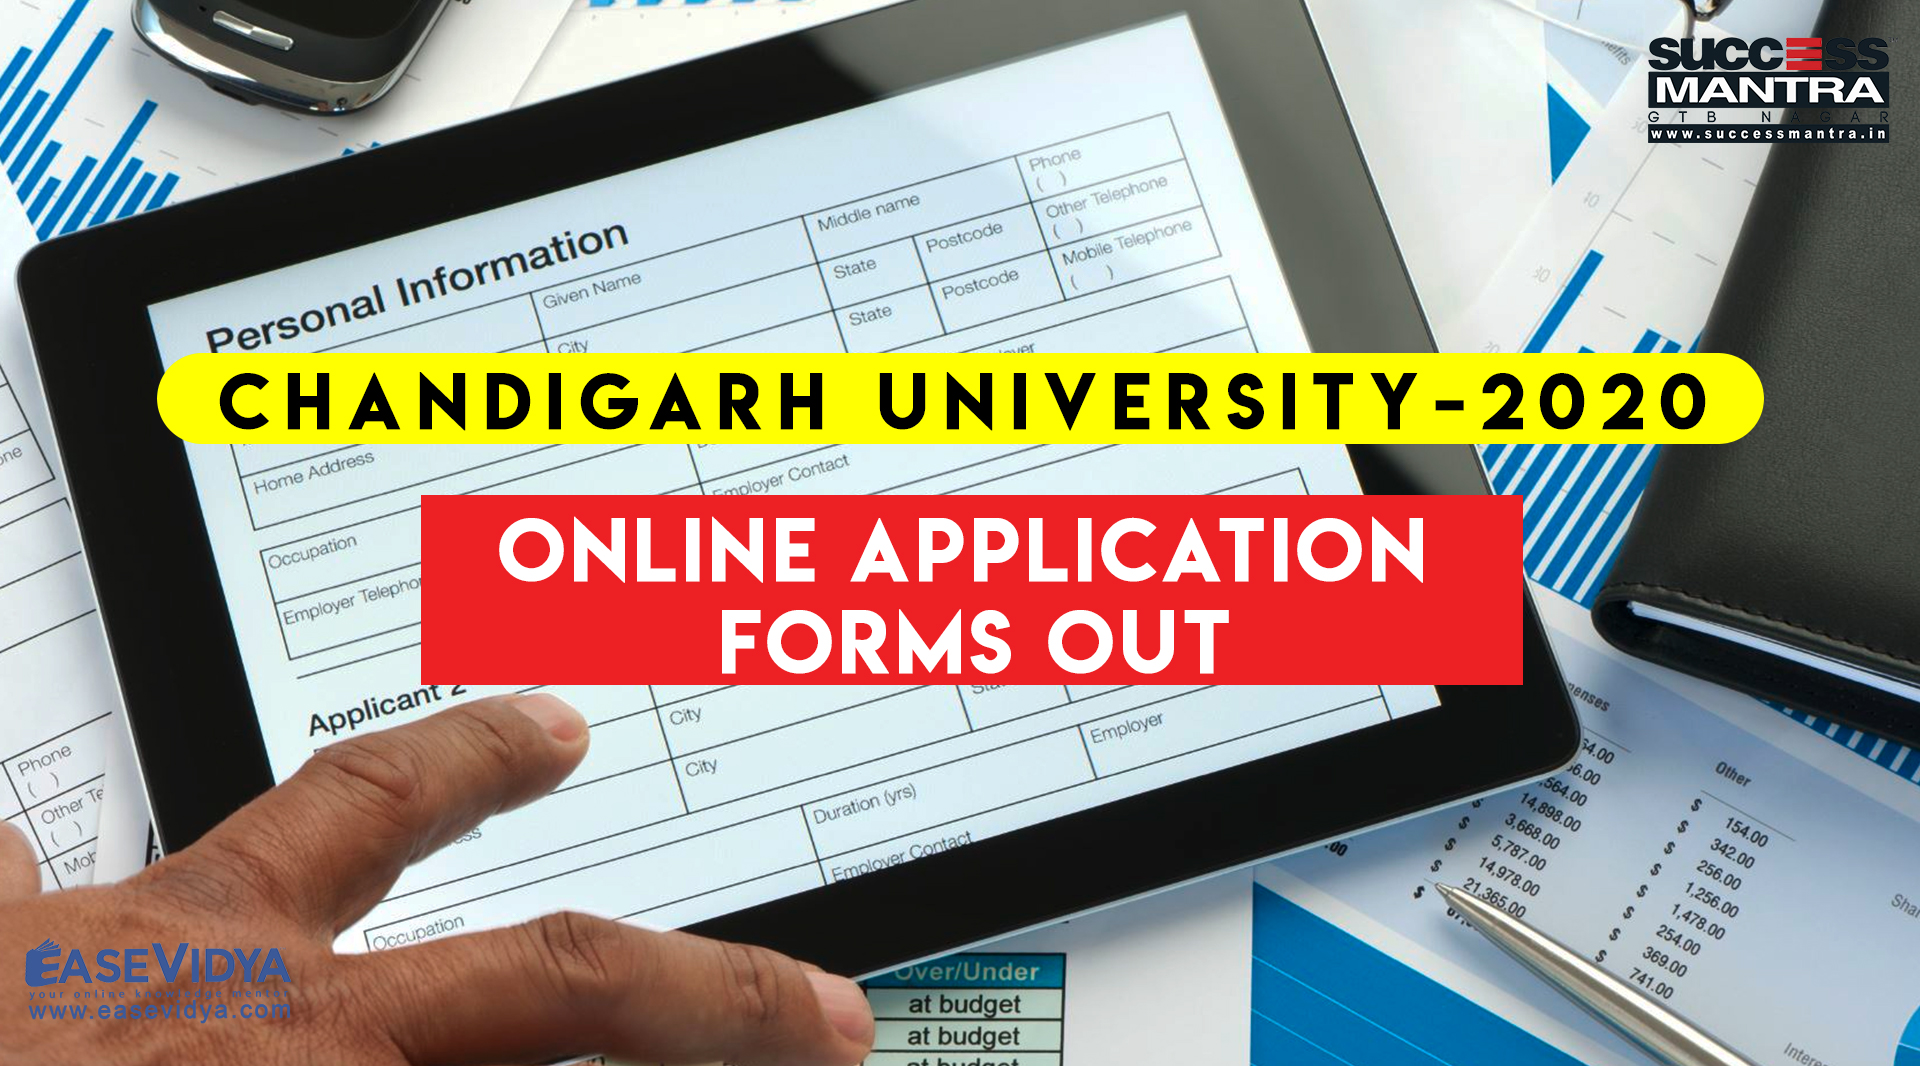 CHANDIGARH UNIVERSITY APPLICATION FORMS OUT 2020 